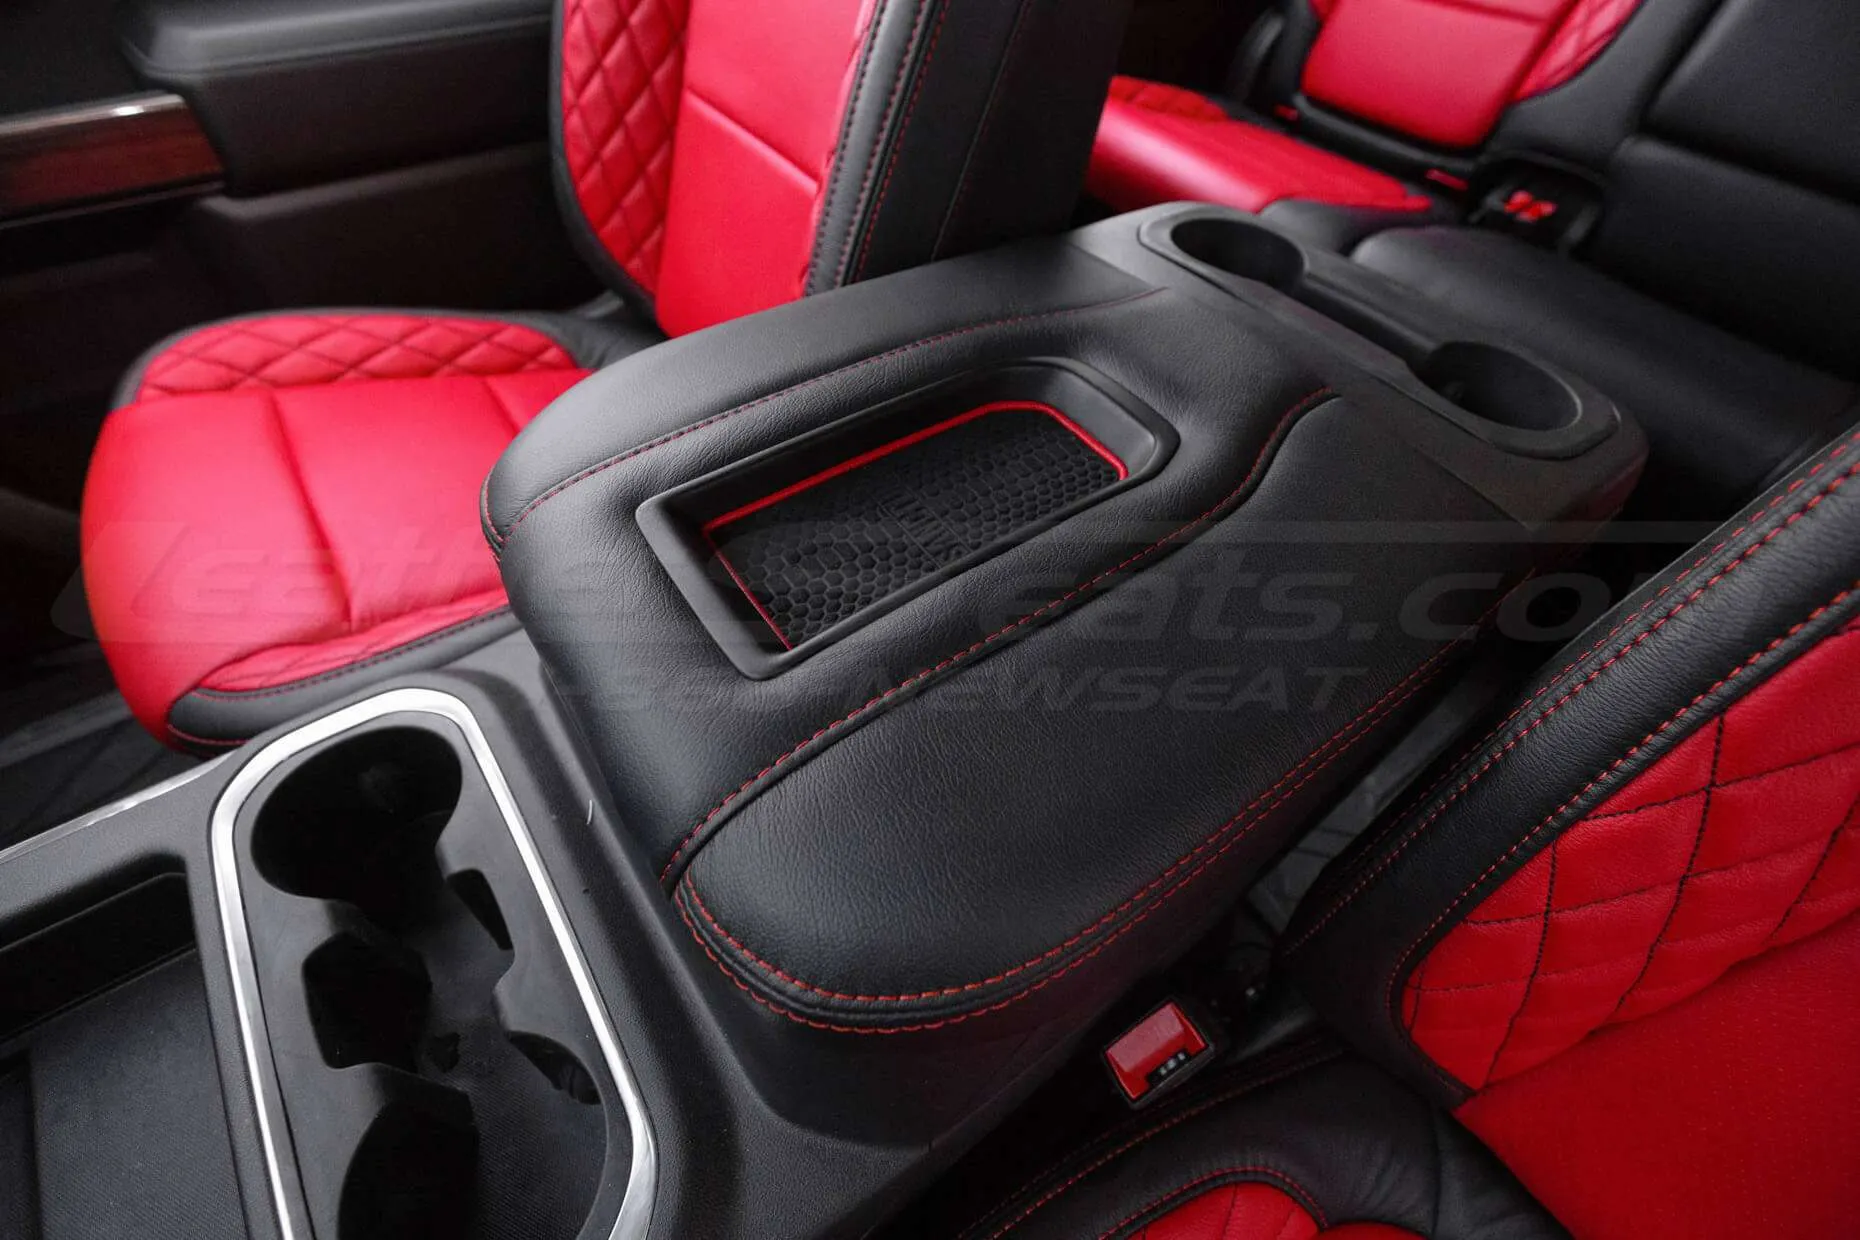 Alternative view of wireless charging center console lid